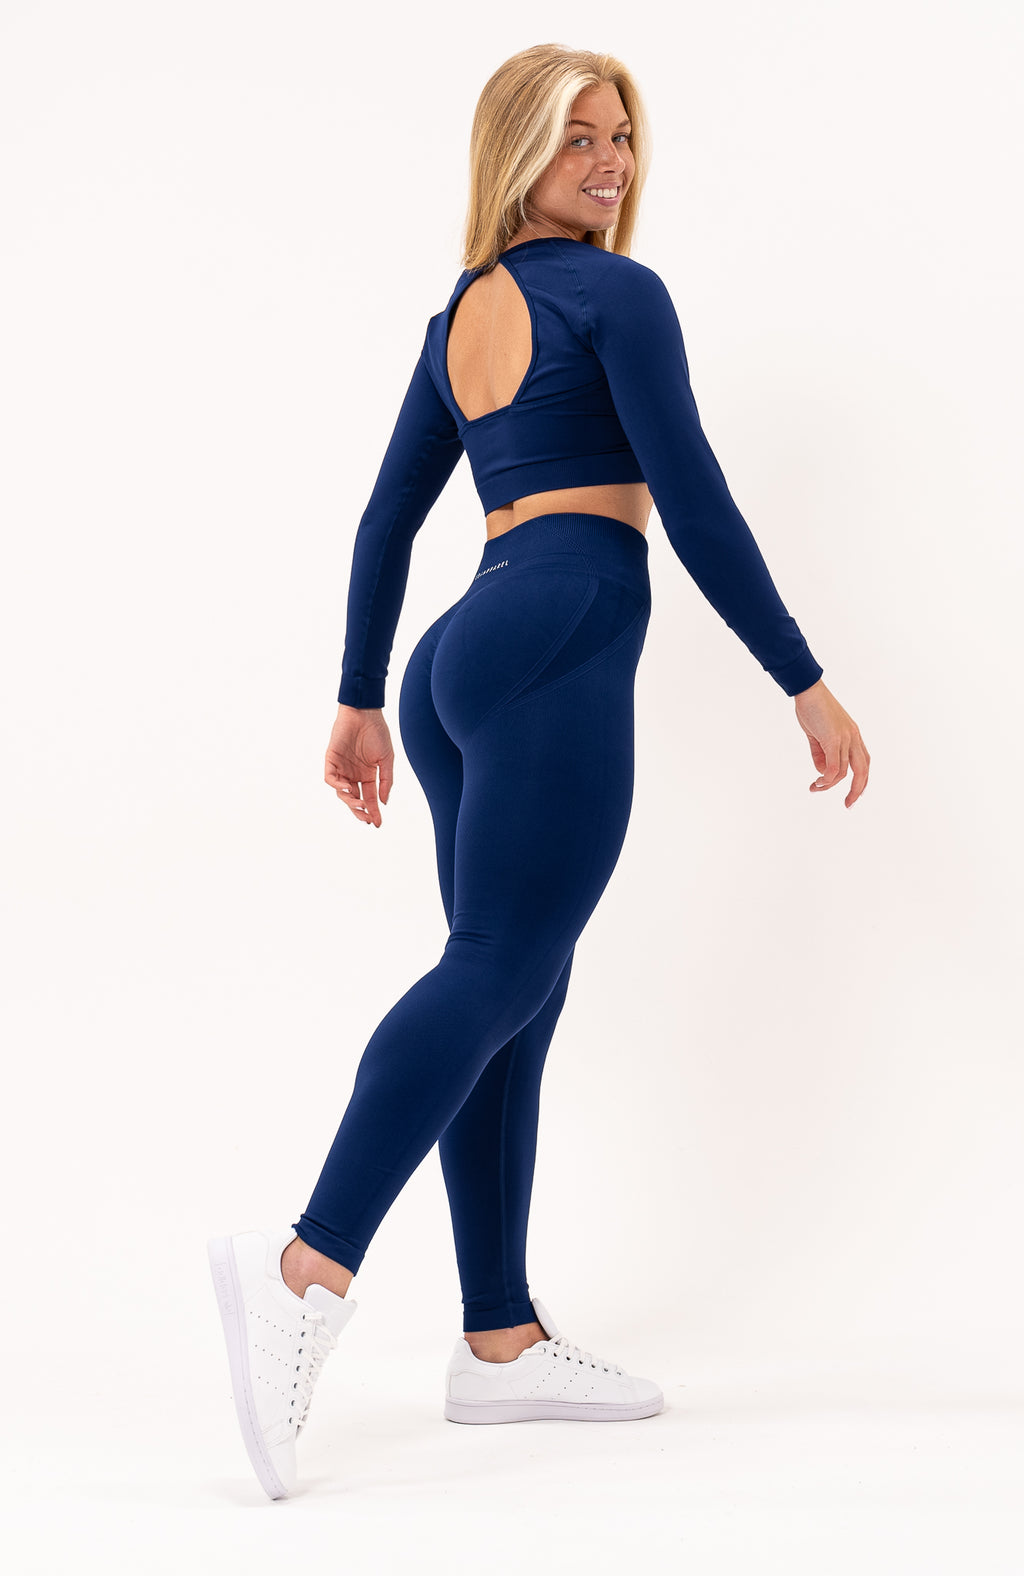 V3 Apparel Womens 2-Piece Tempo Seamless Scrunch Workout Outfit